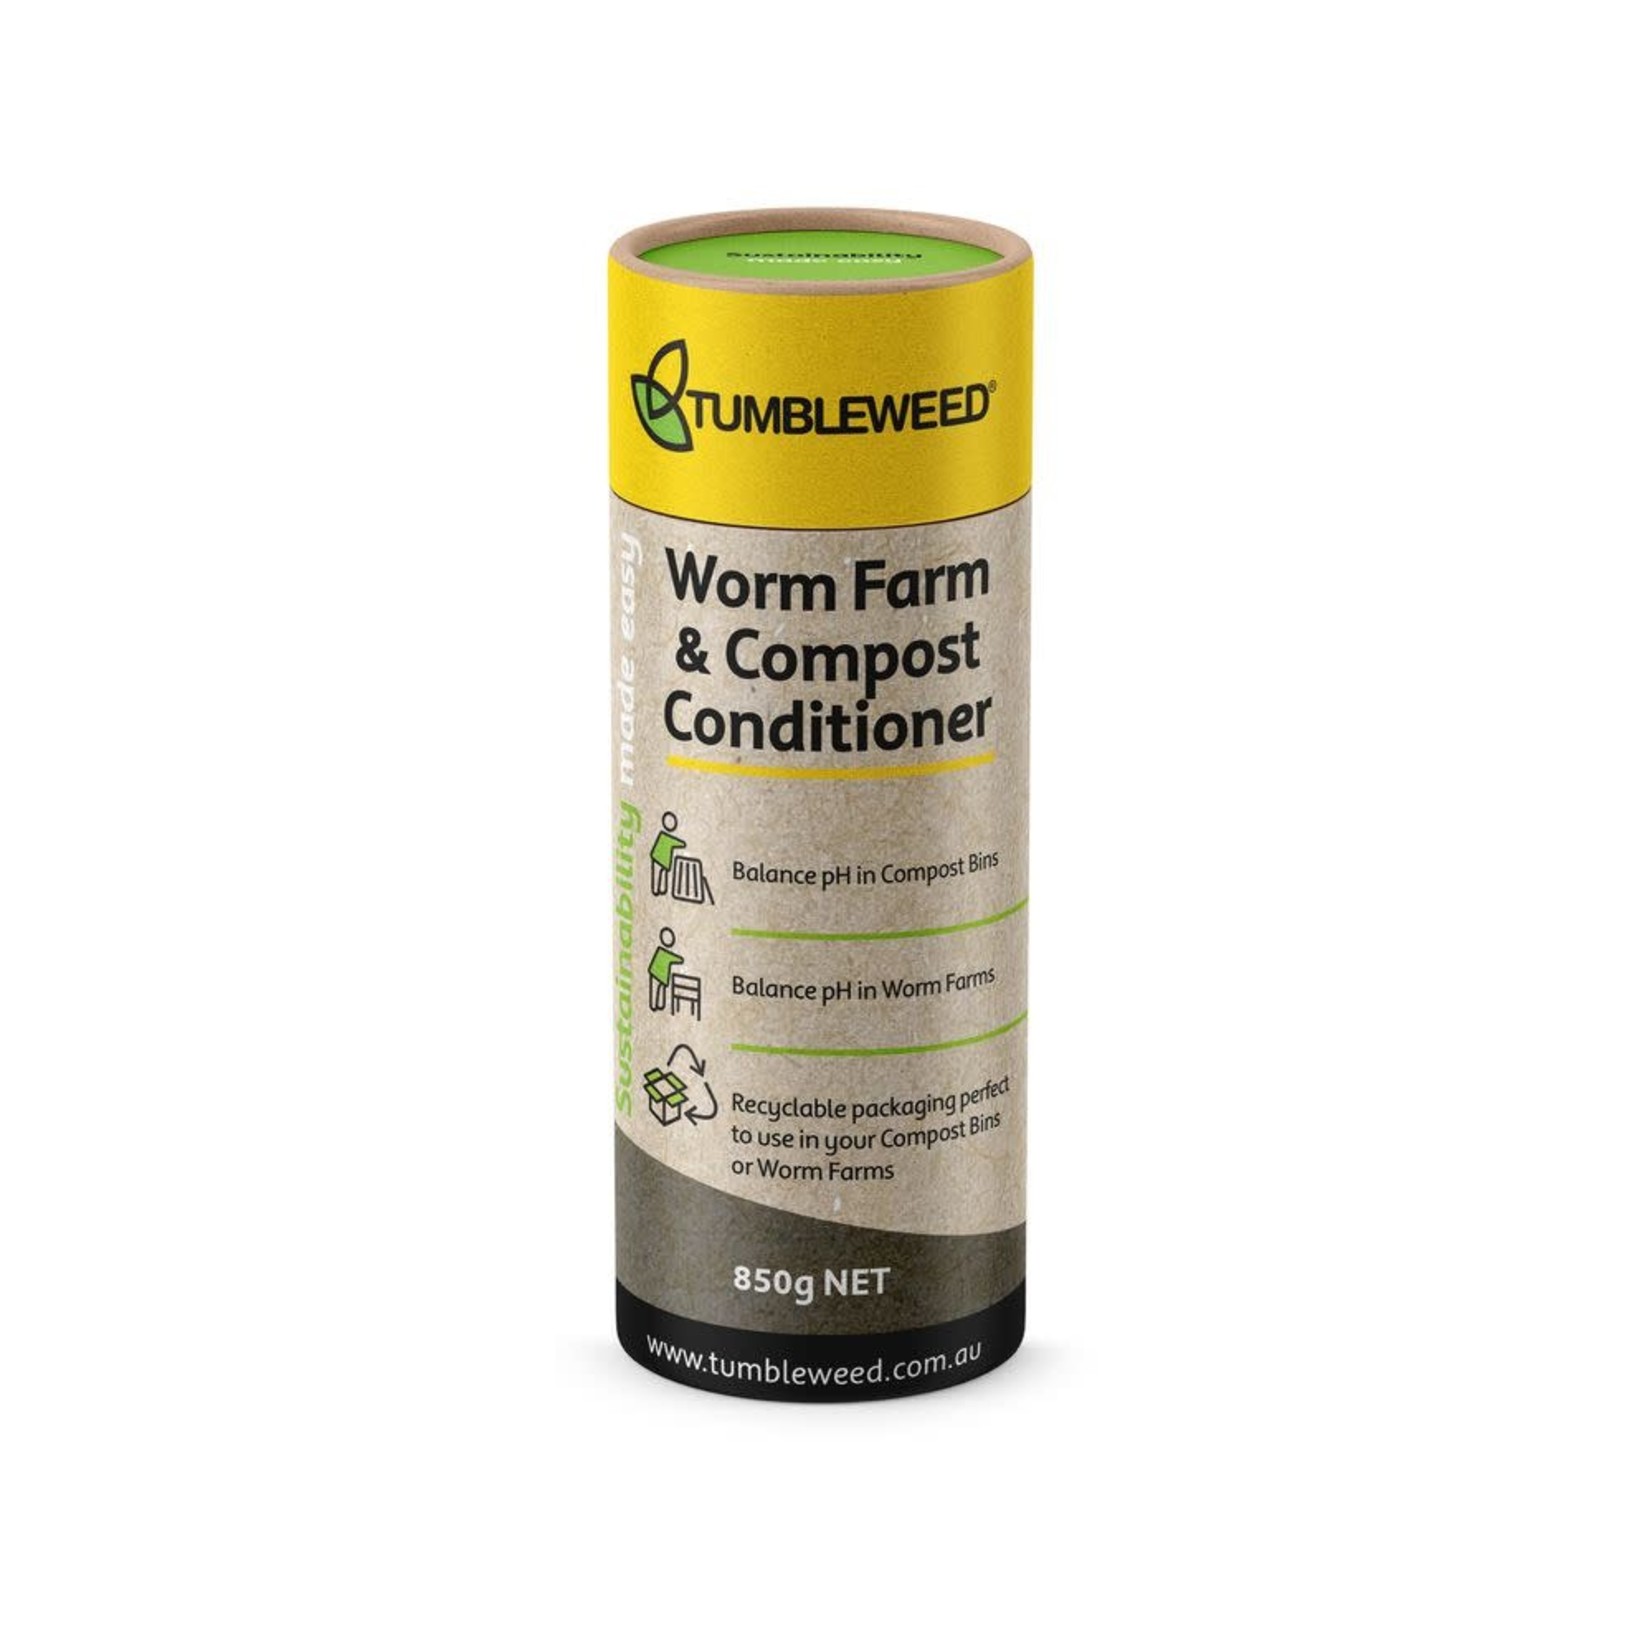 RELN Tumbleweed Worm Farm & Compost Conditioner